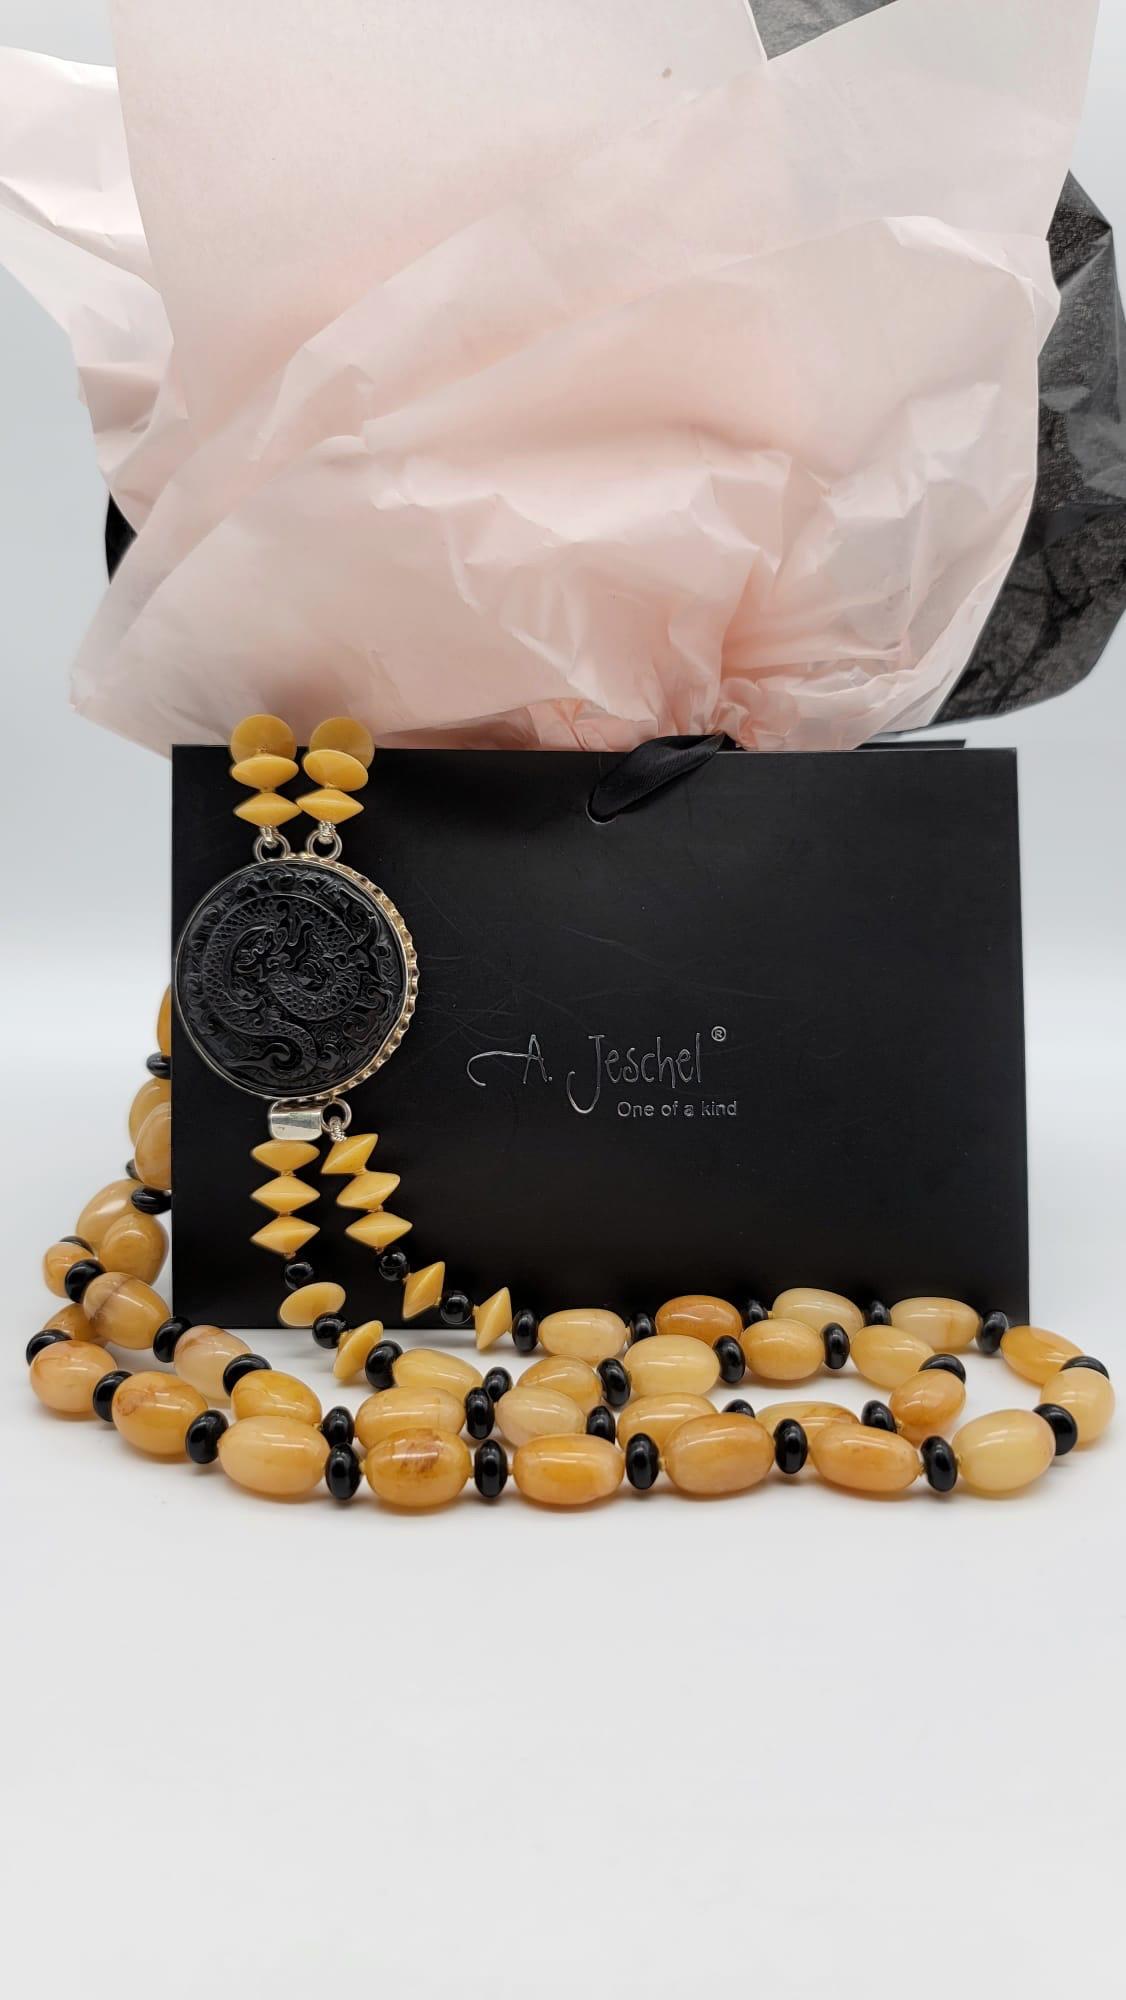 Mixed Cut A.jeschel Richly colored Honey Jade and black Onyx necklace